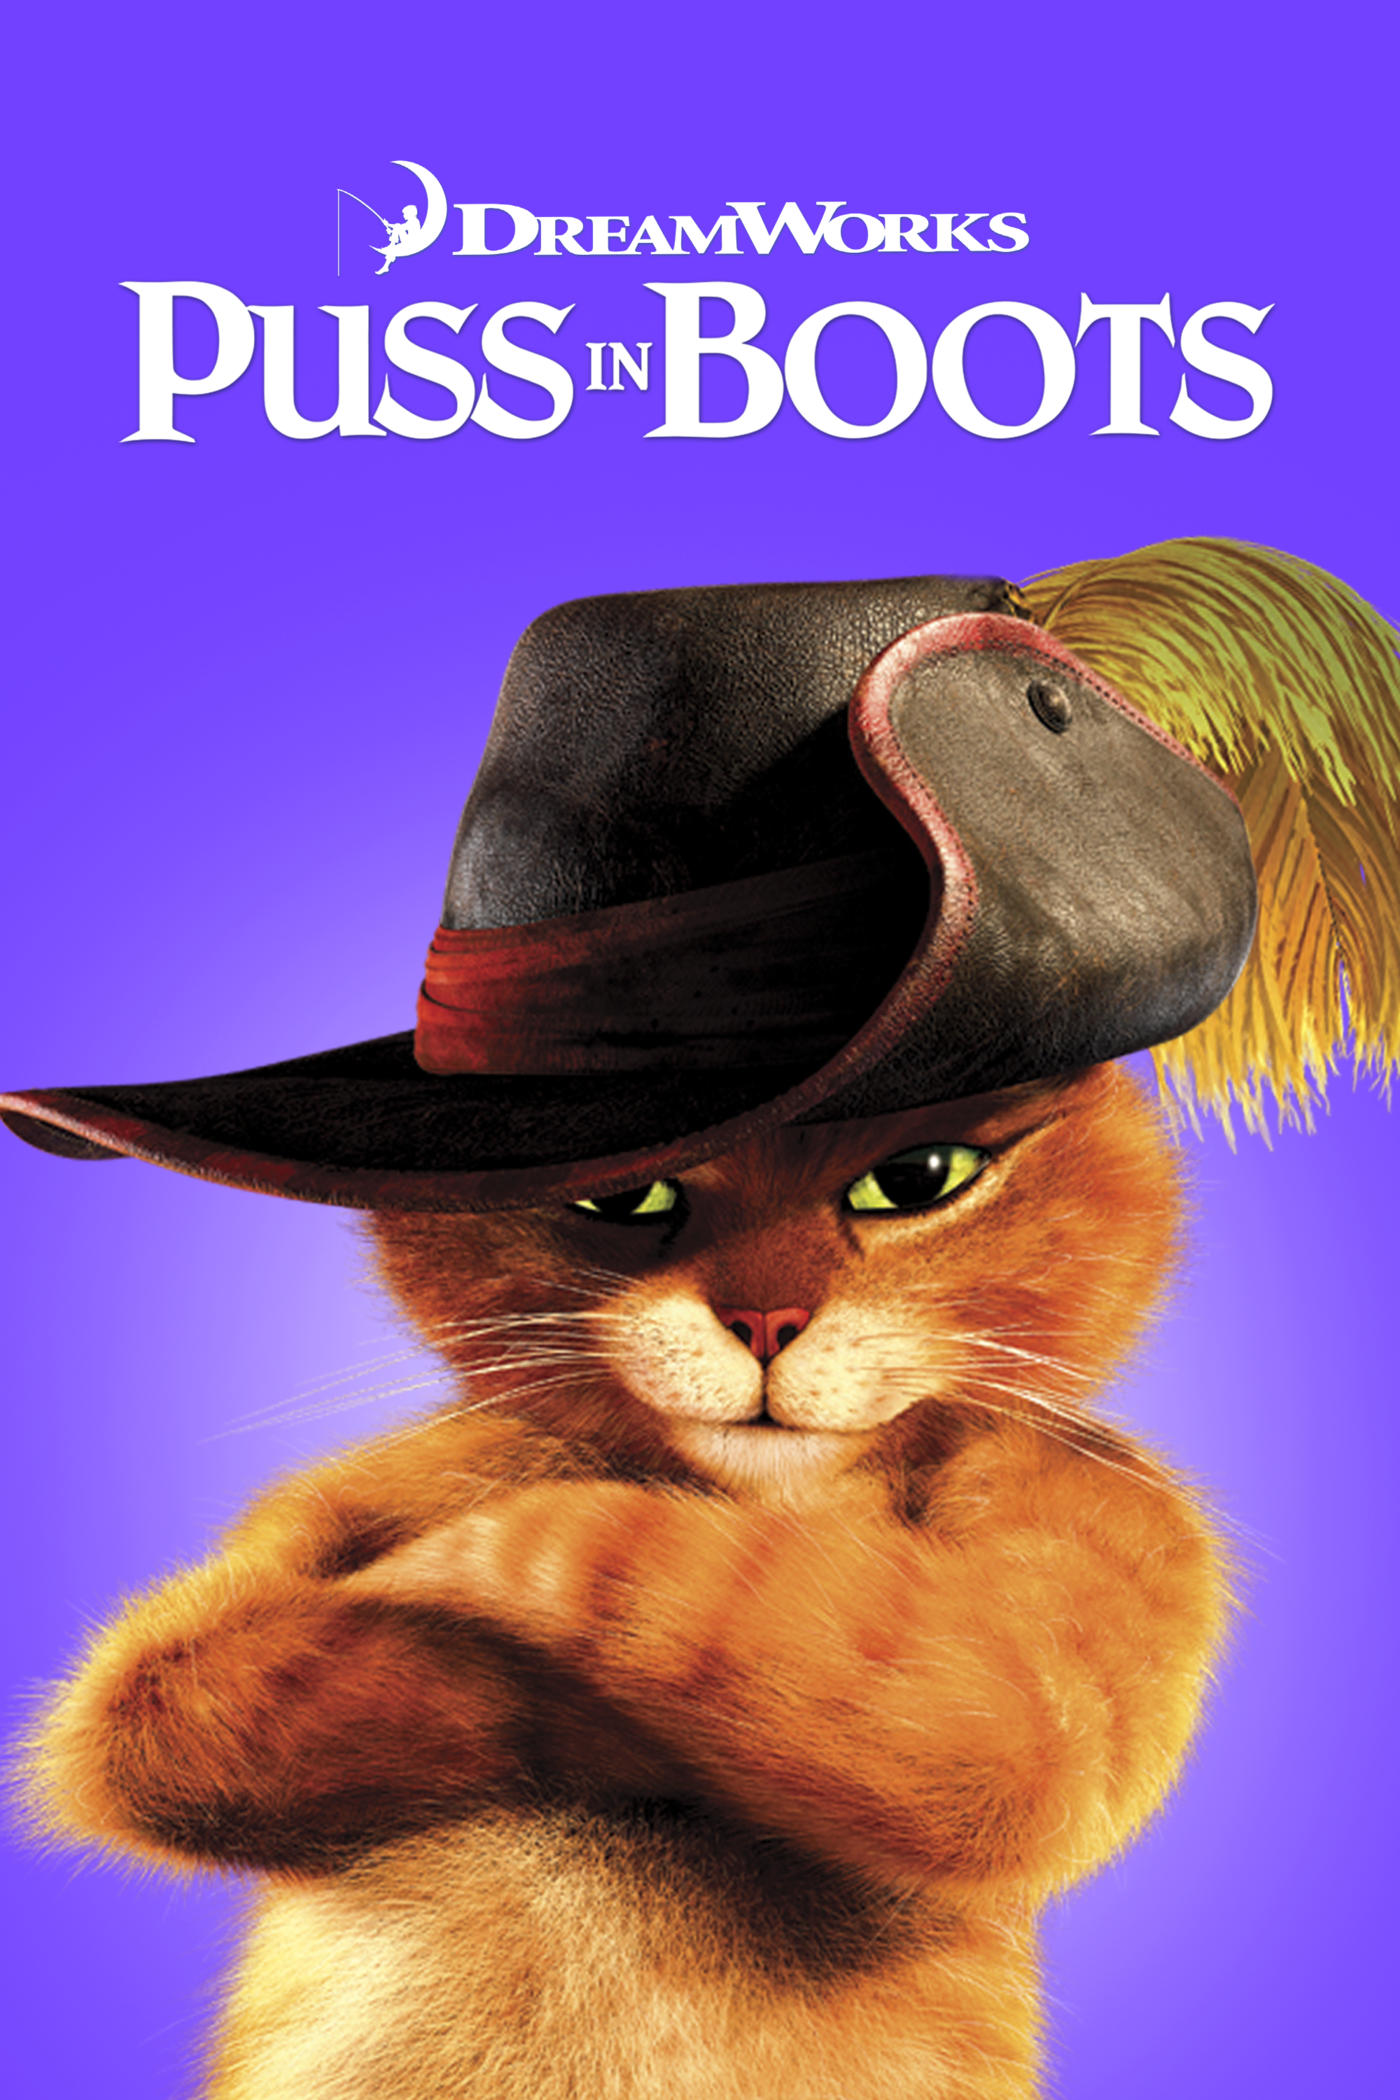 Name Of Female Cat In Puss In Boots